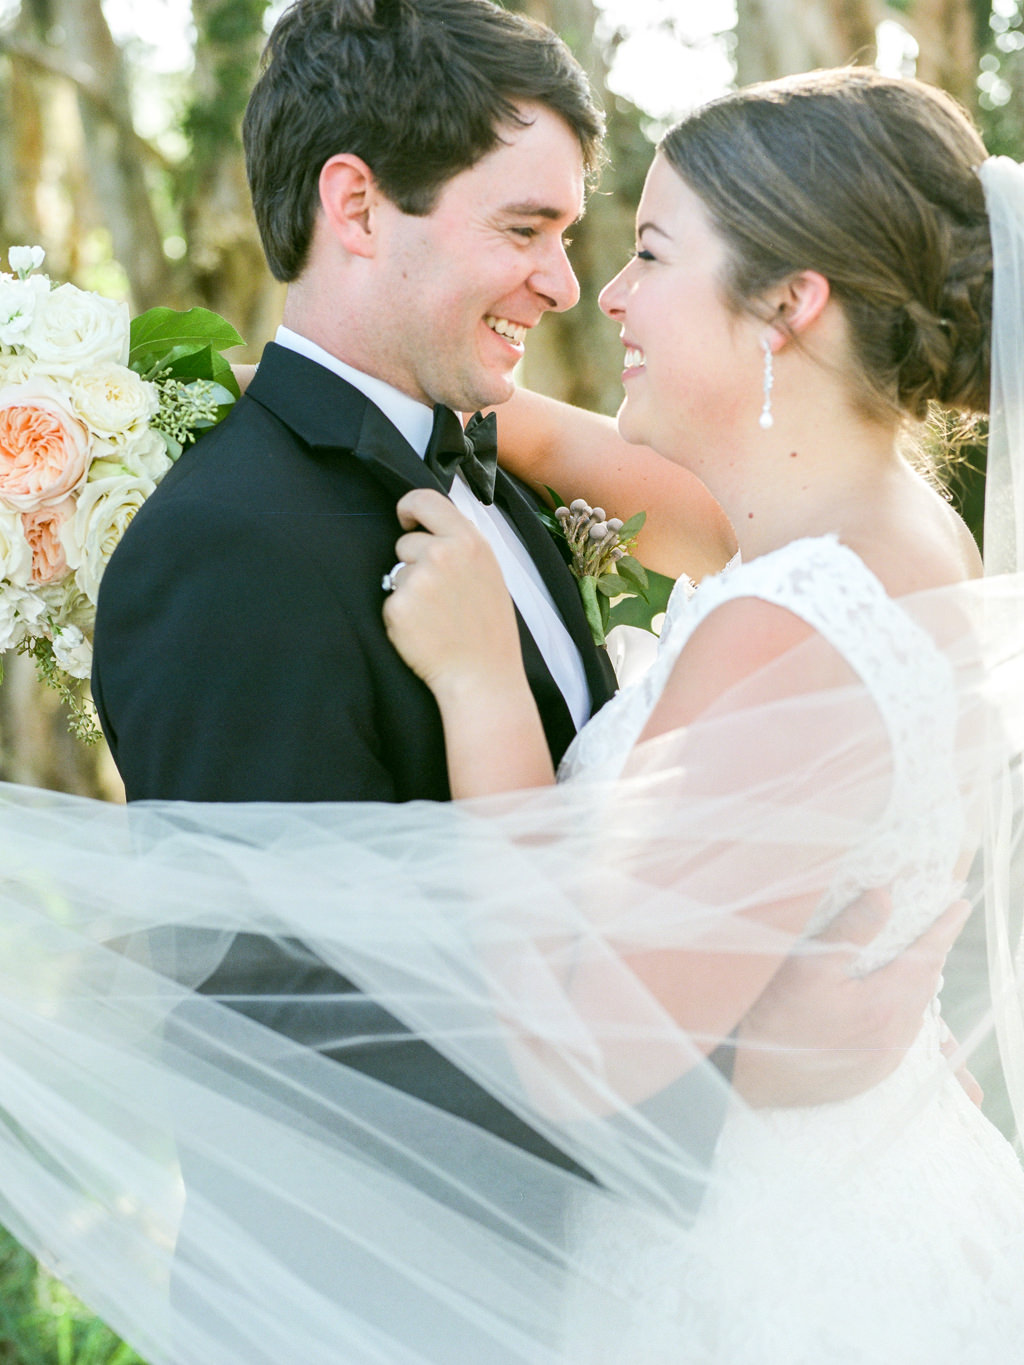 Creative Bride and Groom with Veil Blowing in the Wind Wedding Portrait